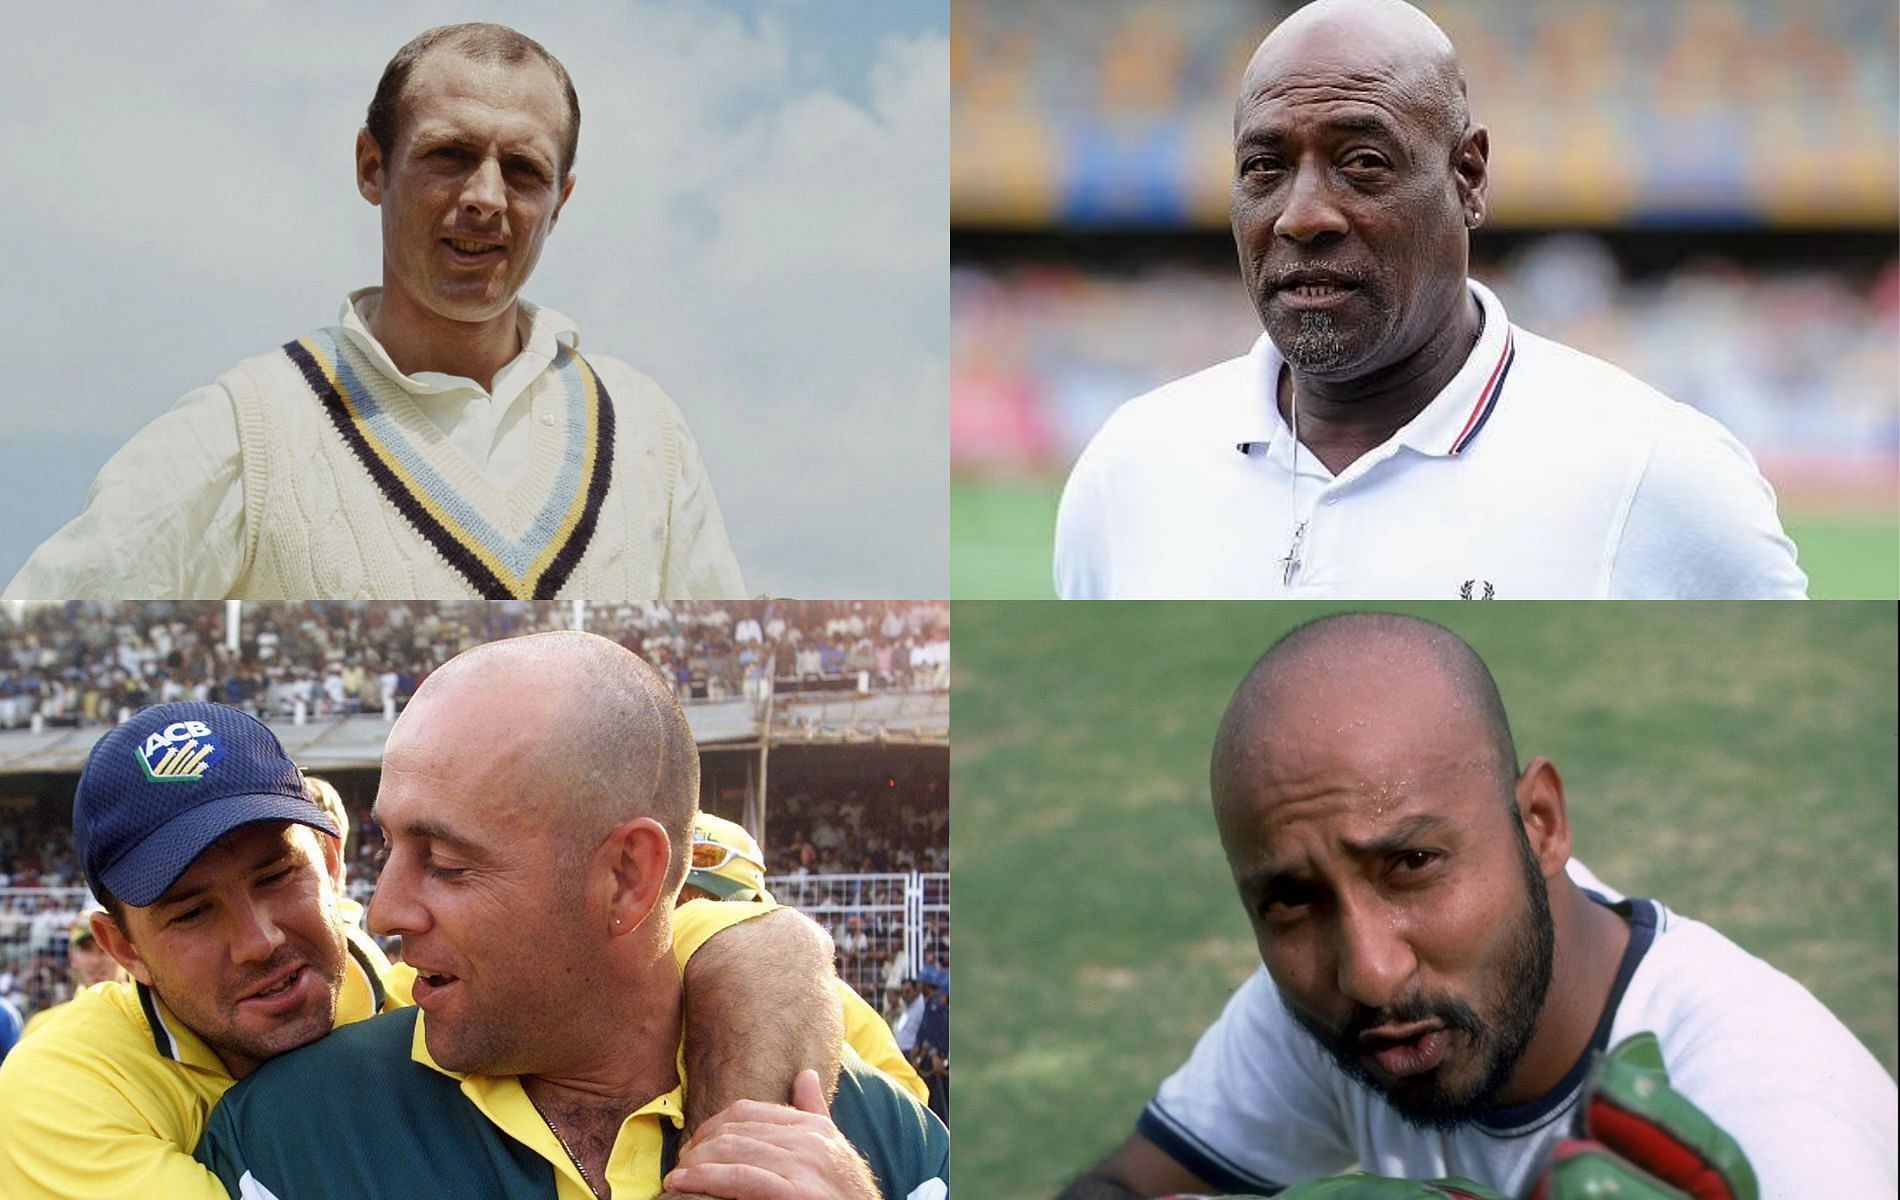 A number of bald cricketers have had successful careers. Pics: Getty Images